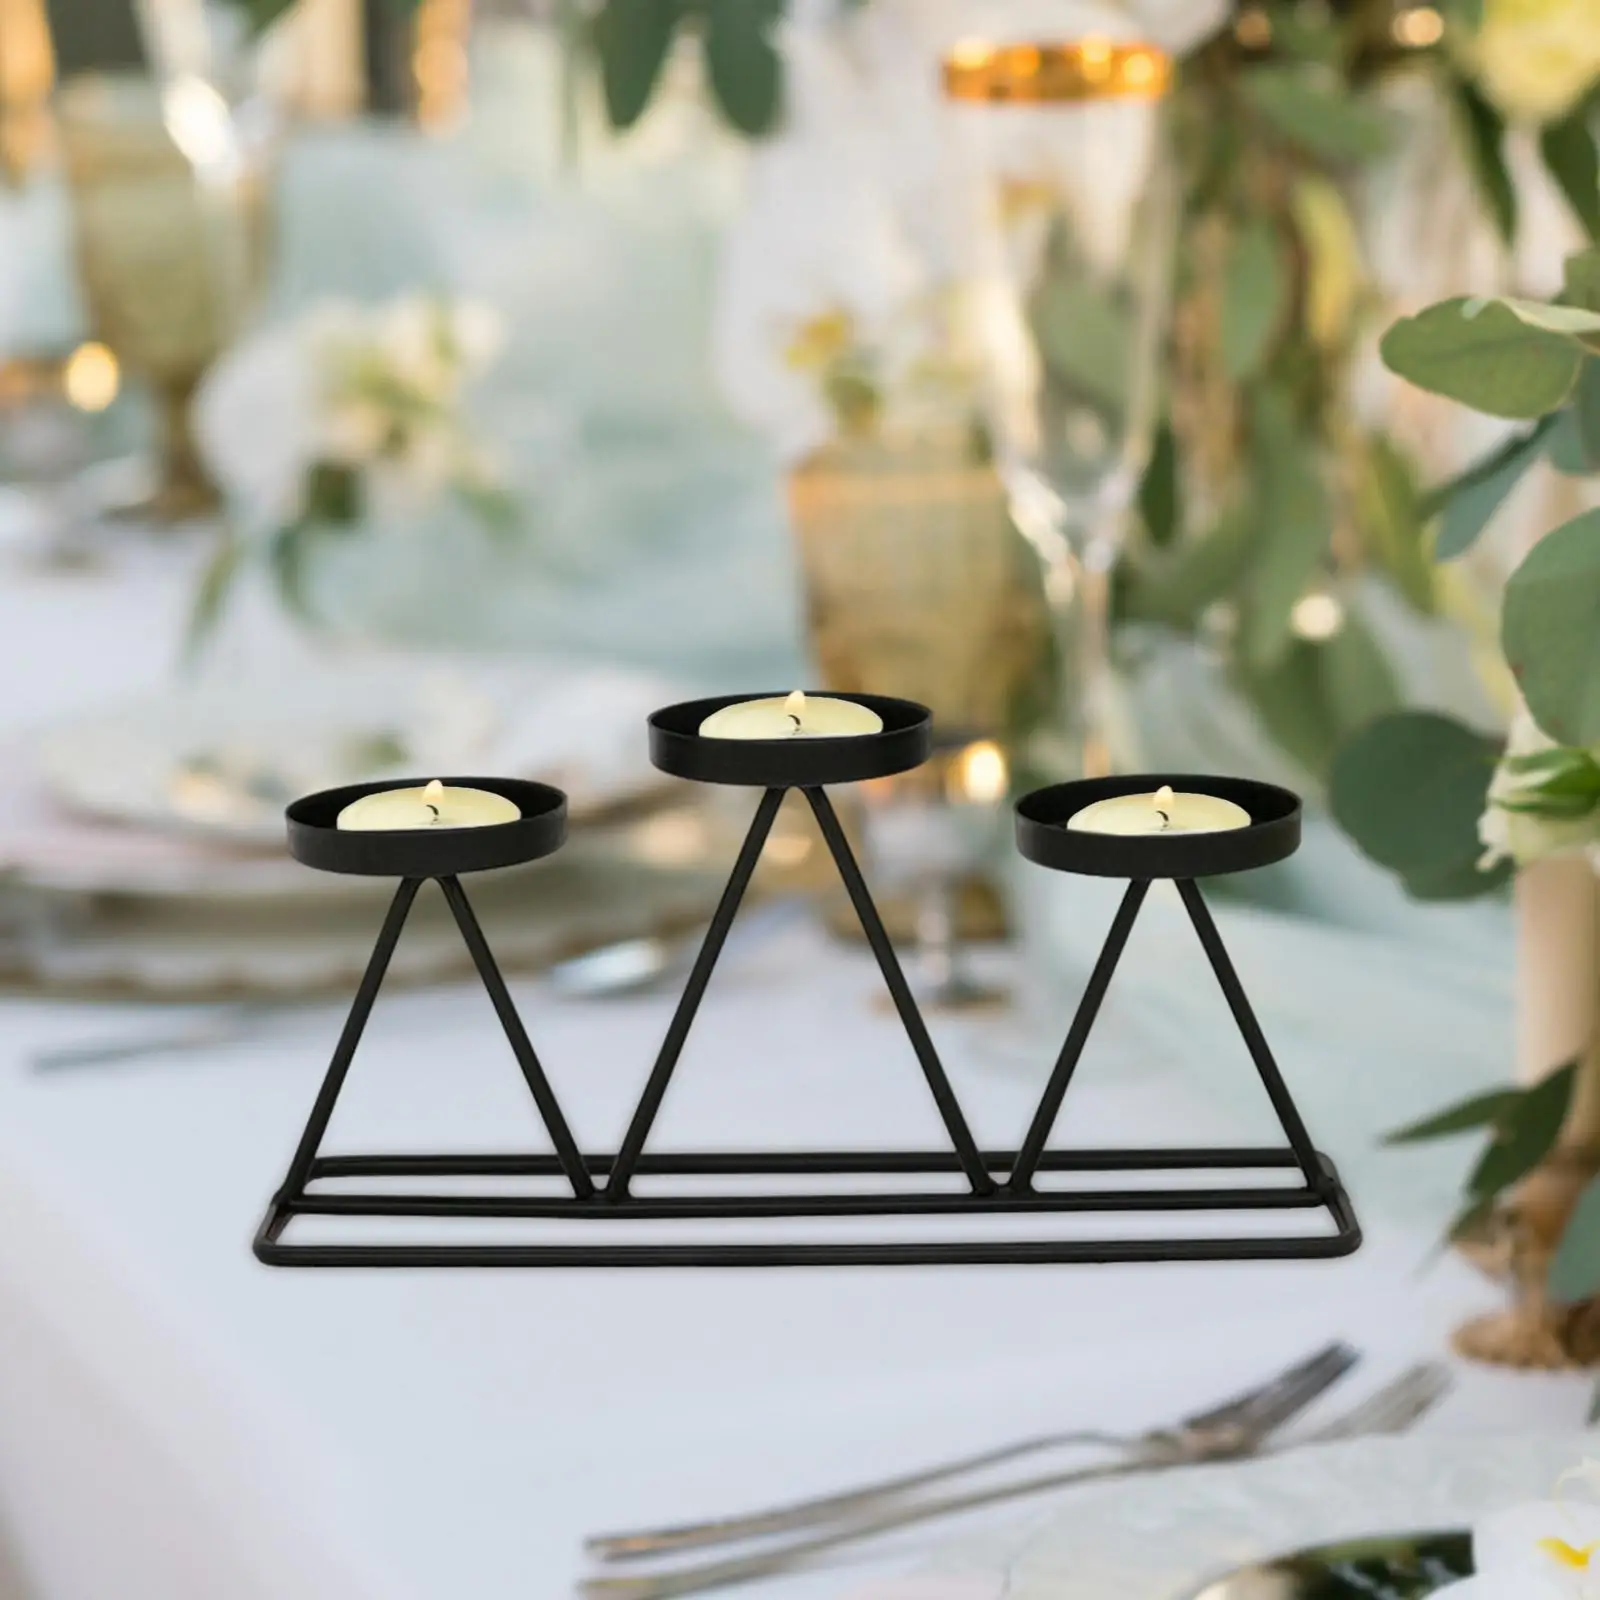 Candle Holder Tealight Decorative Candelabra Metal Candlestick for Holiday Party Table Centerpieces Home Decor